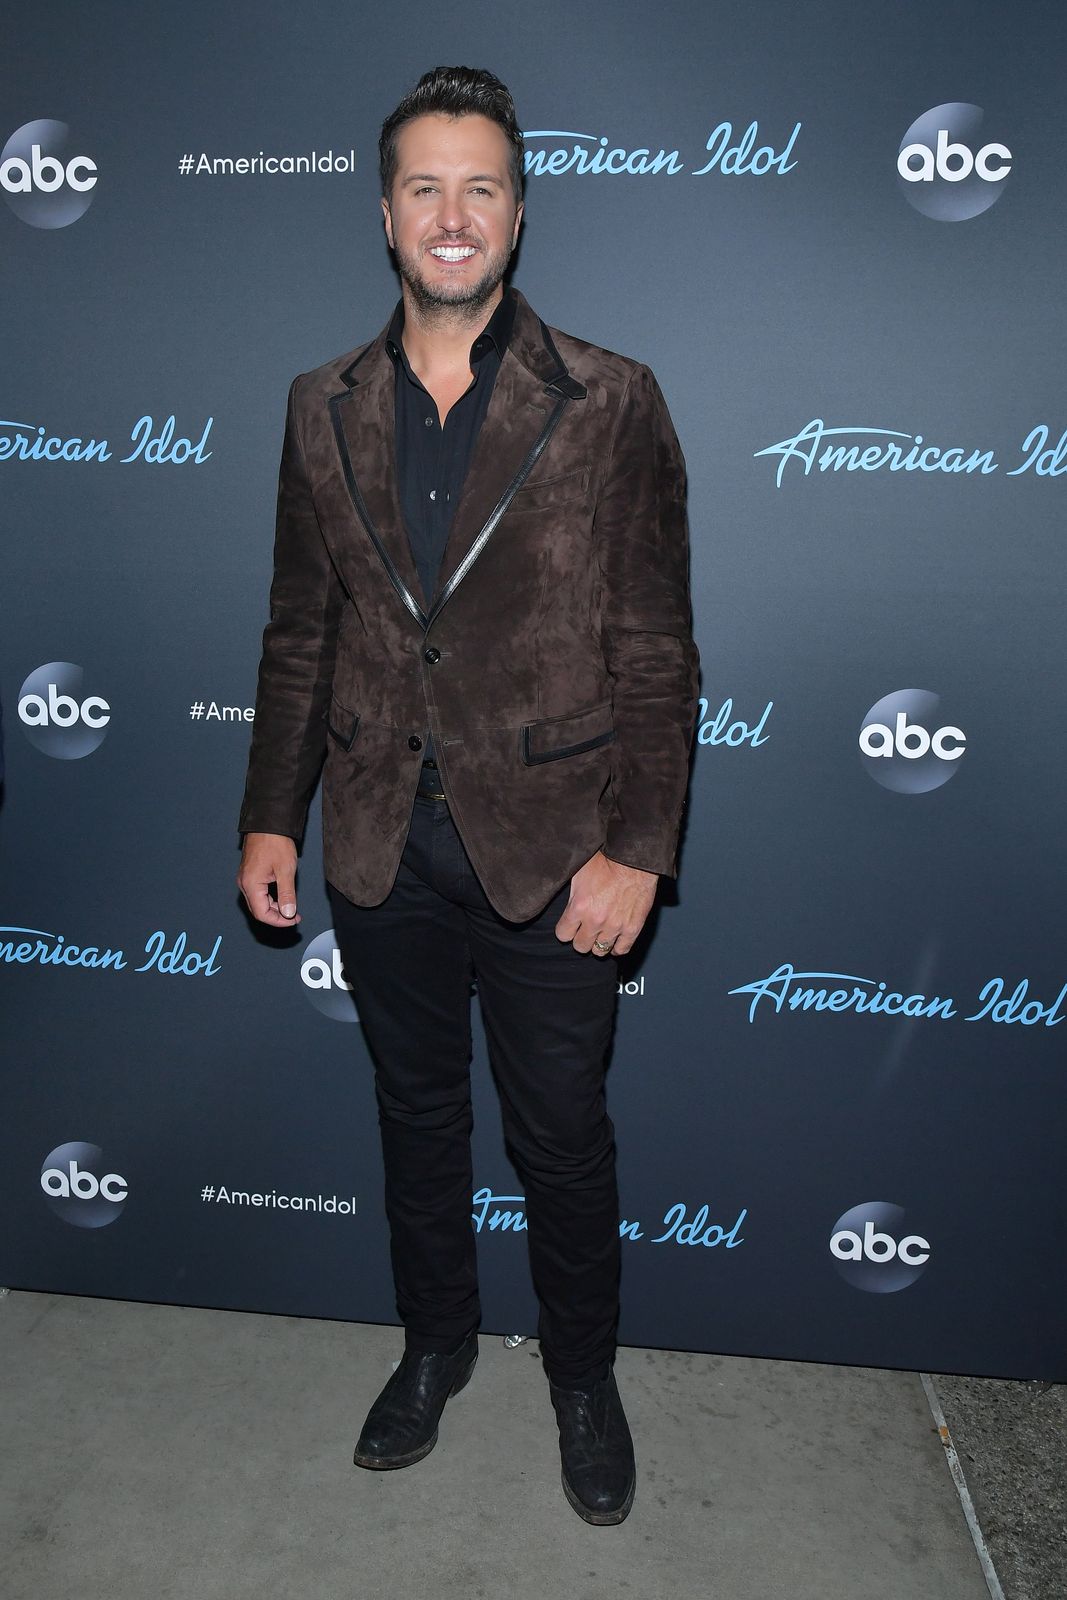 Luke Bryan at the "American Idol" Finale on May 19, 2019, in Los Angeles, California | Photo: Amy Sussman/Getty Images